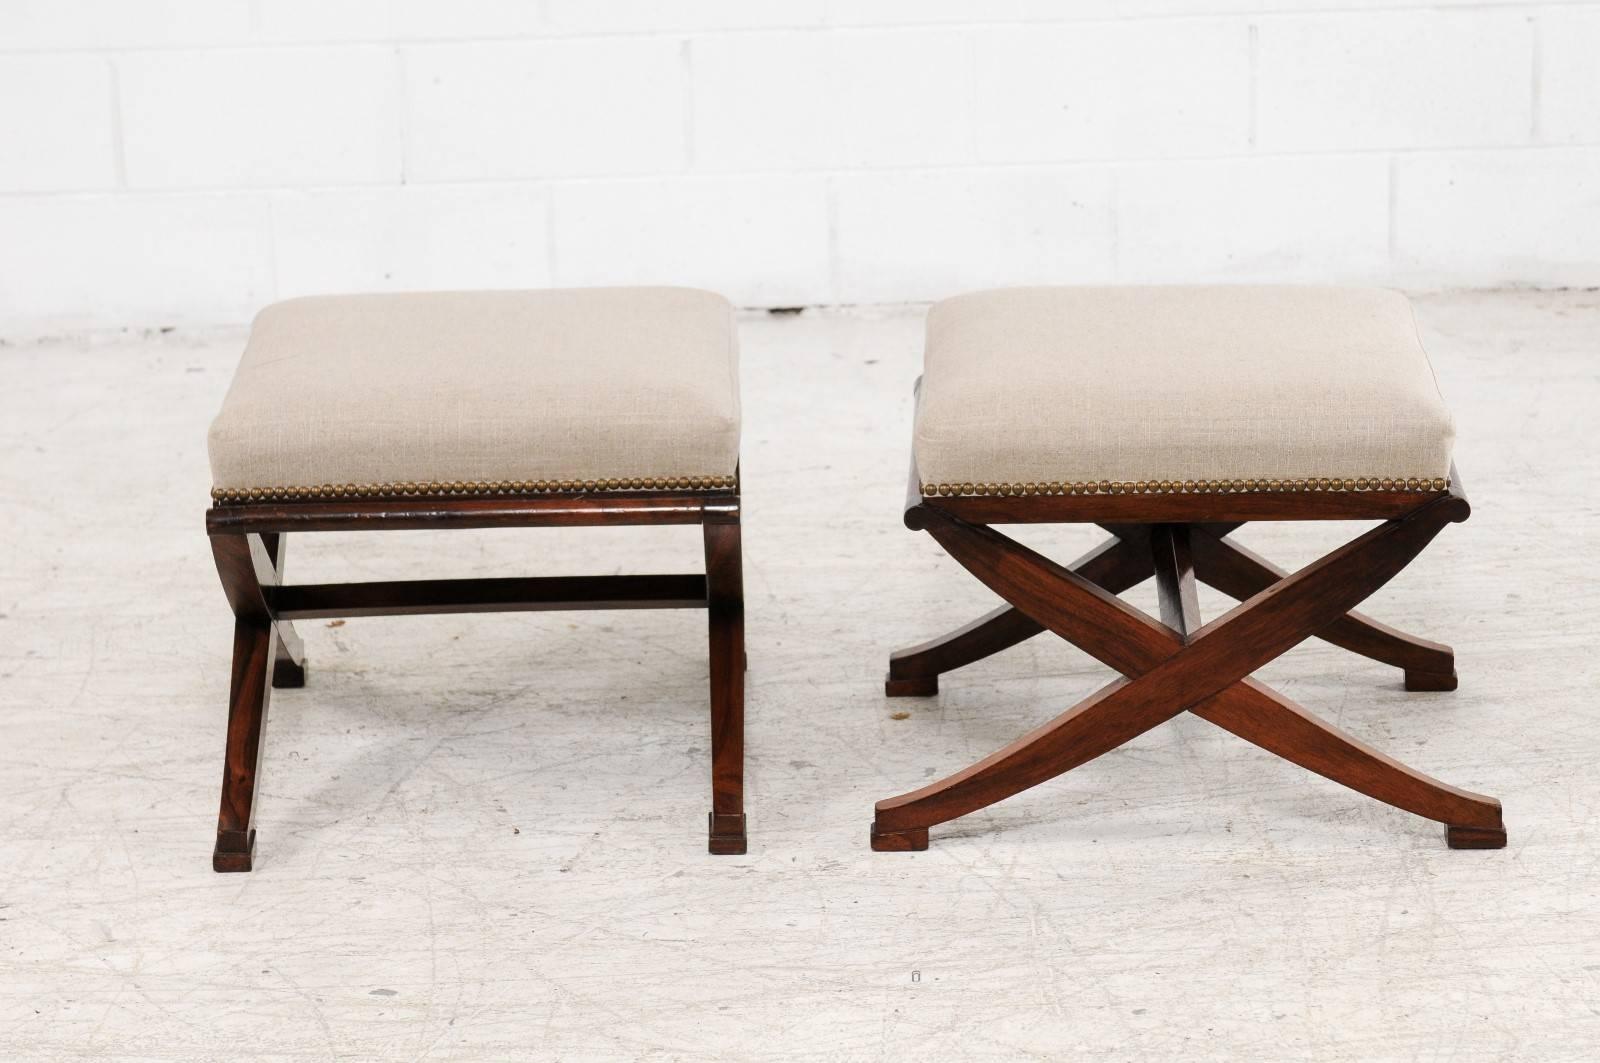 19th Century Pair of French Mahogany X-Form Stools, circa 1870 with Newly Upholstered Seats